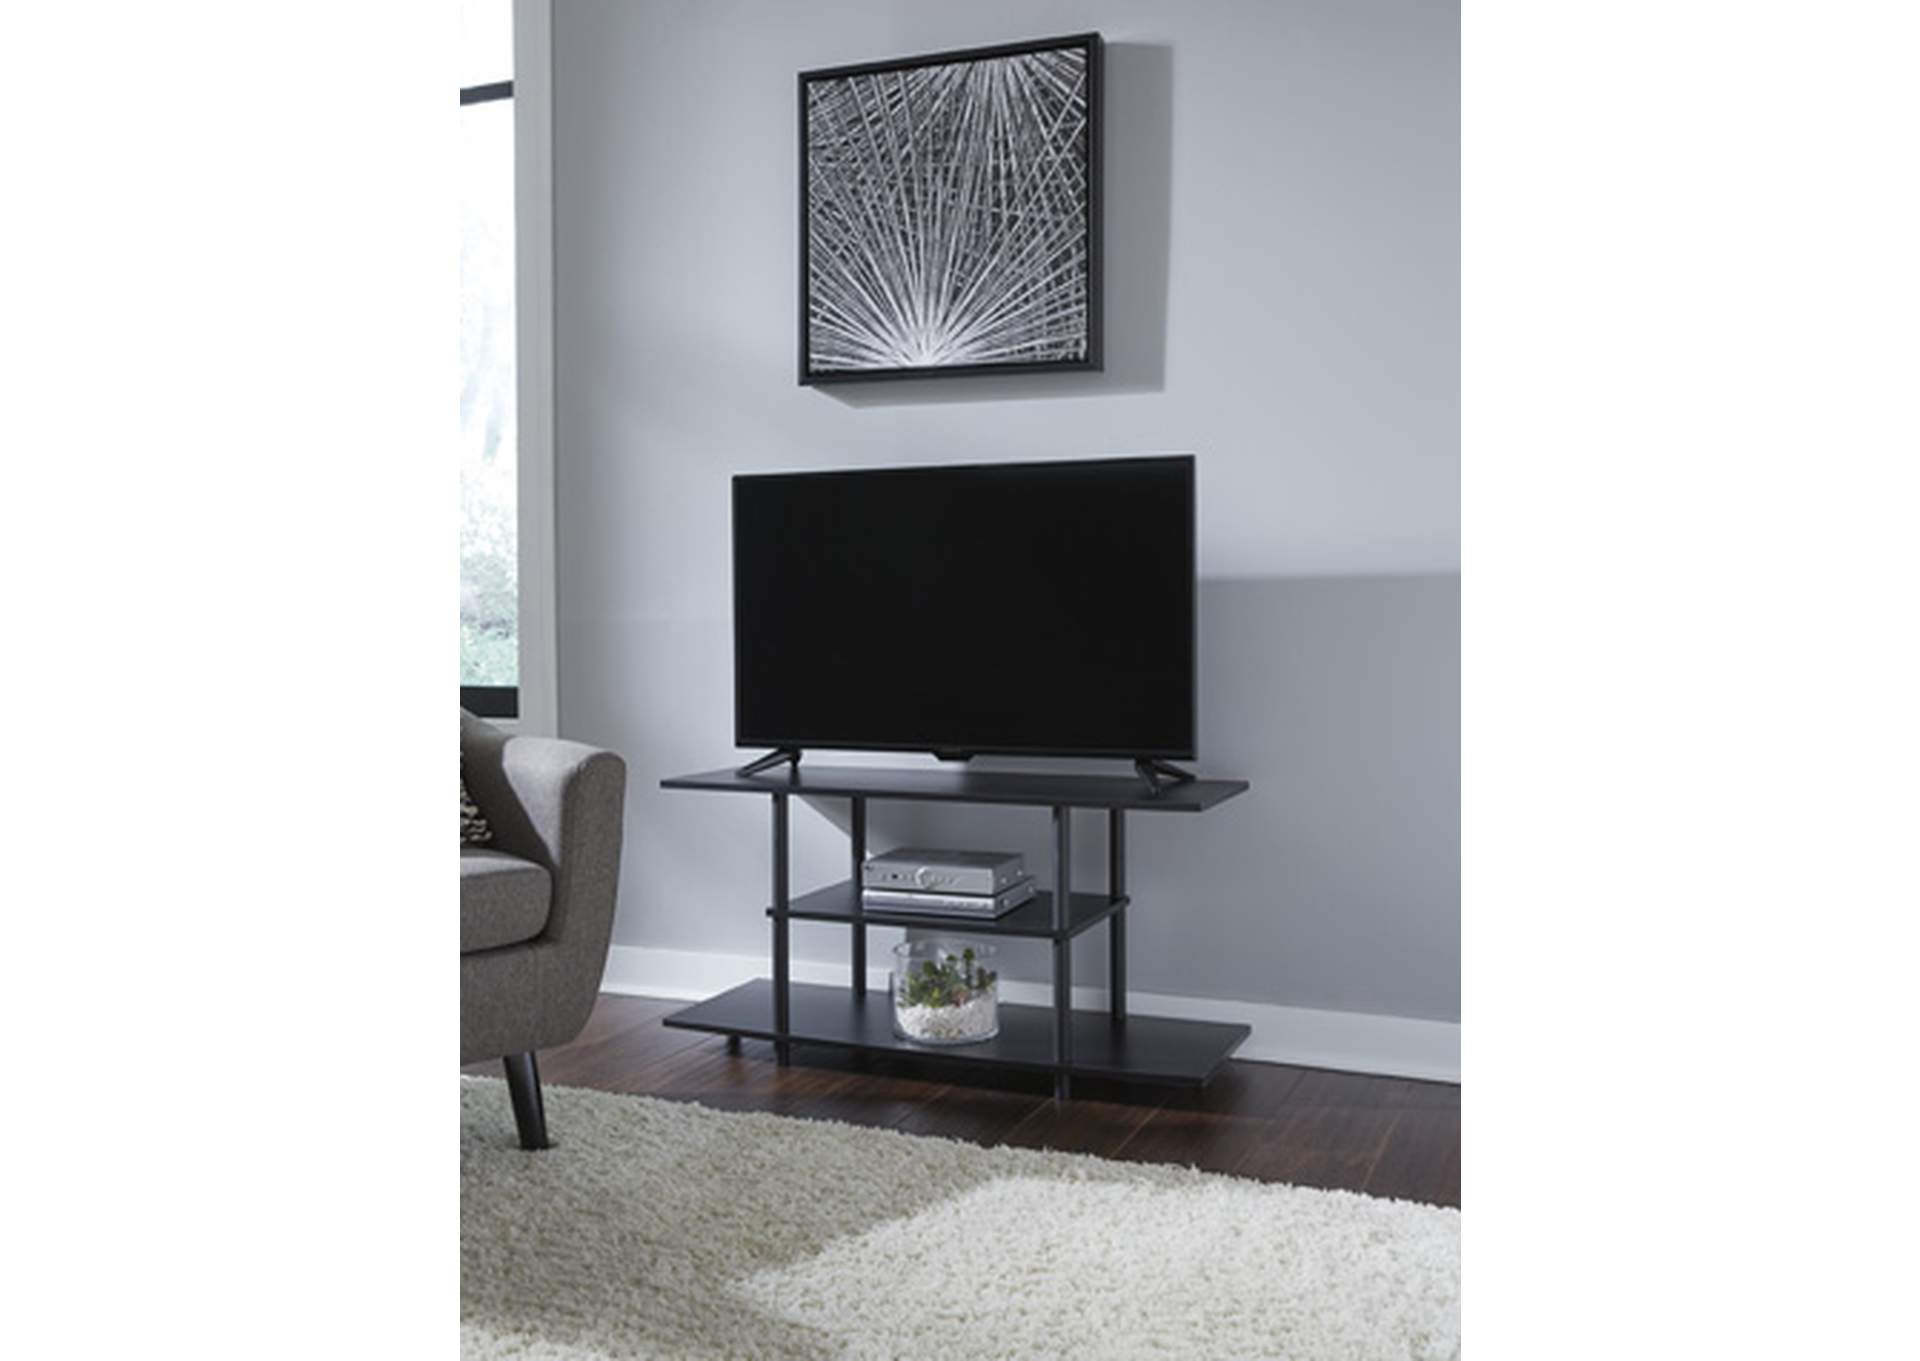 Cooperson 42" TV Stand,Signature Design By Ashley